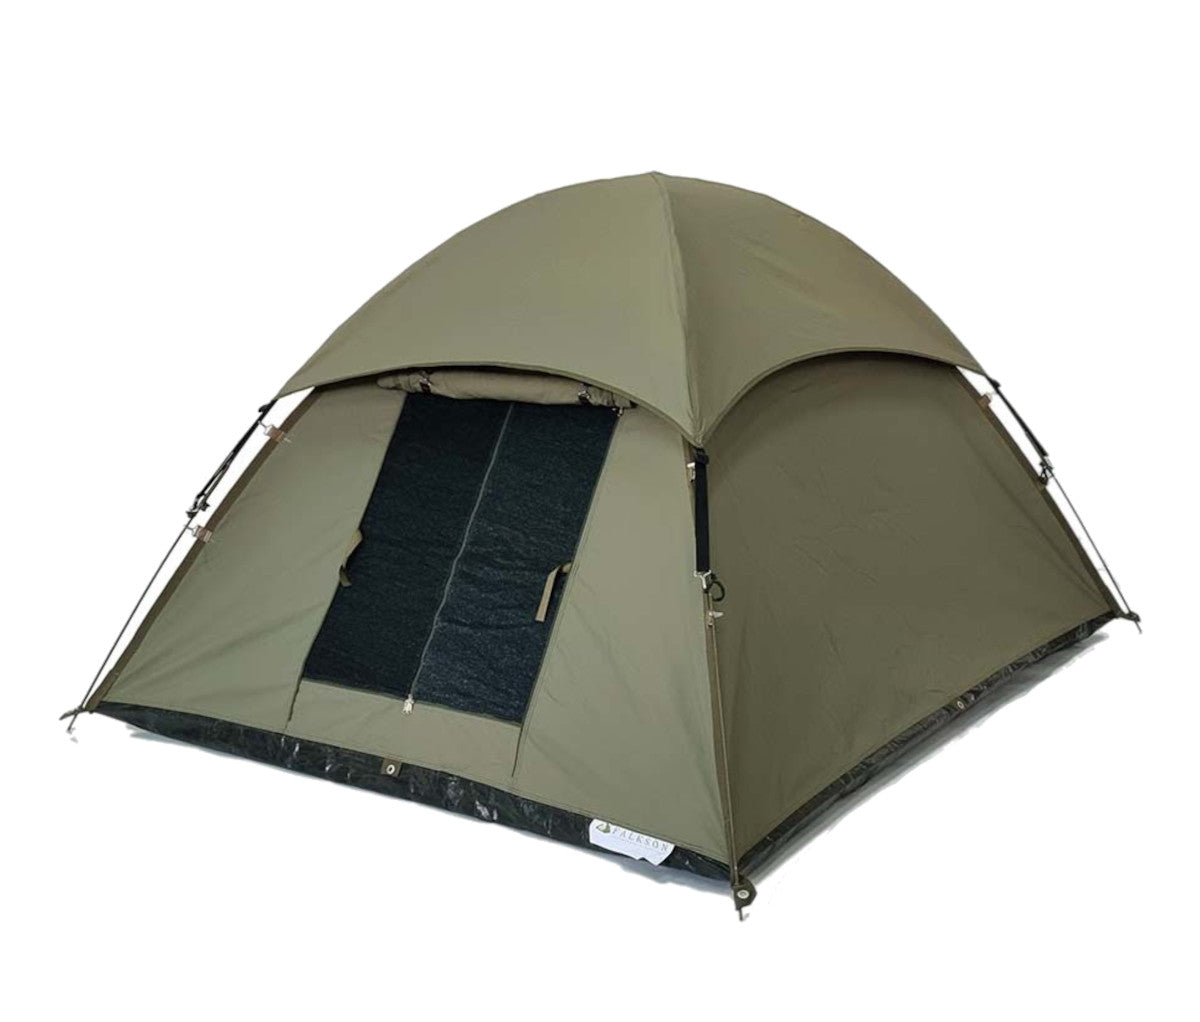 FALKSON Adventurer 2 | 2 person tent | 1.8x2.1m Bow tent | Compact canvas camping tent